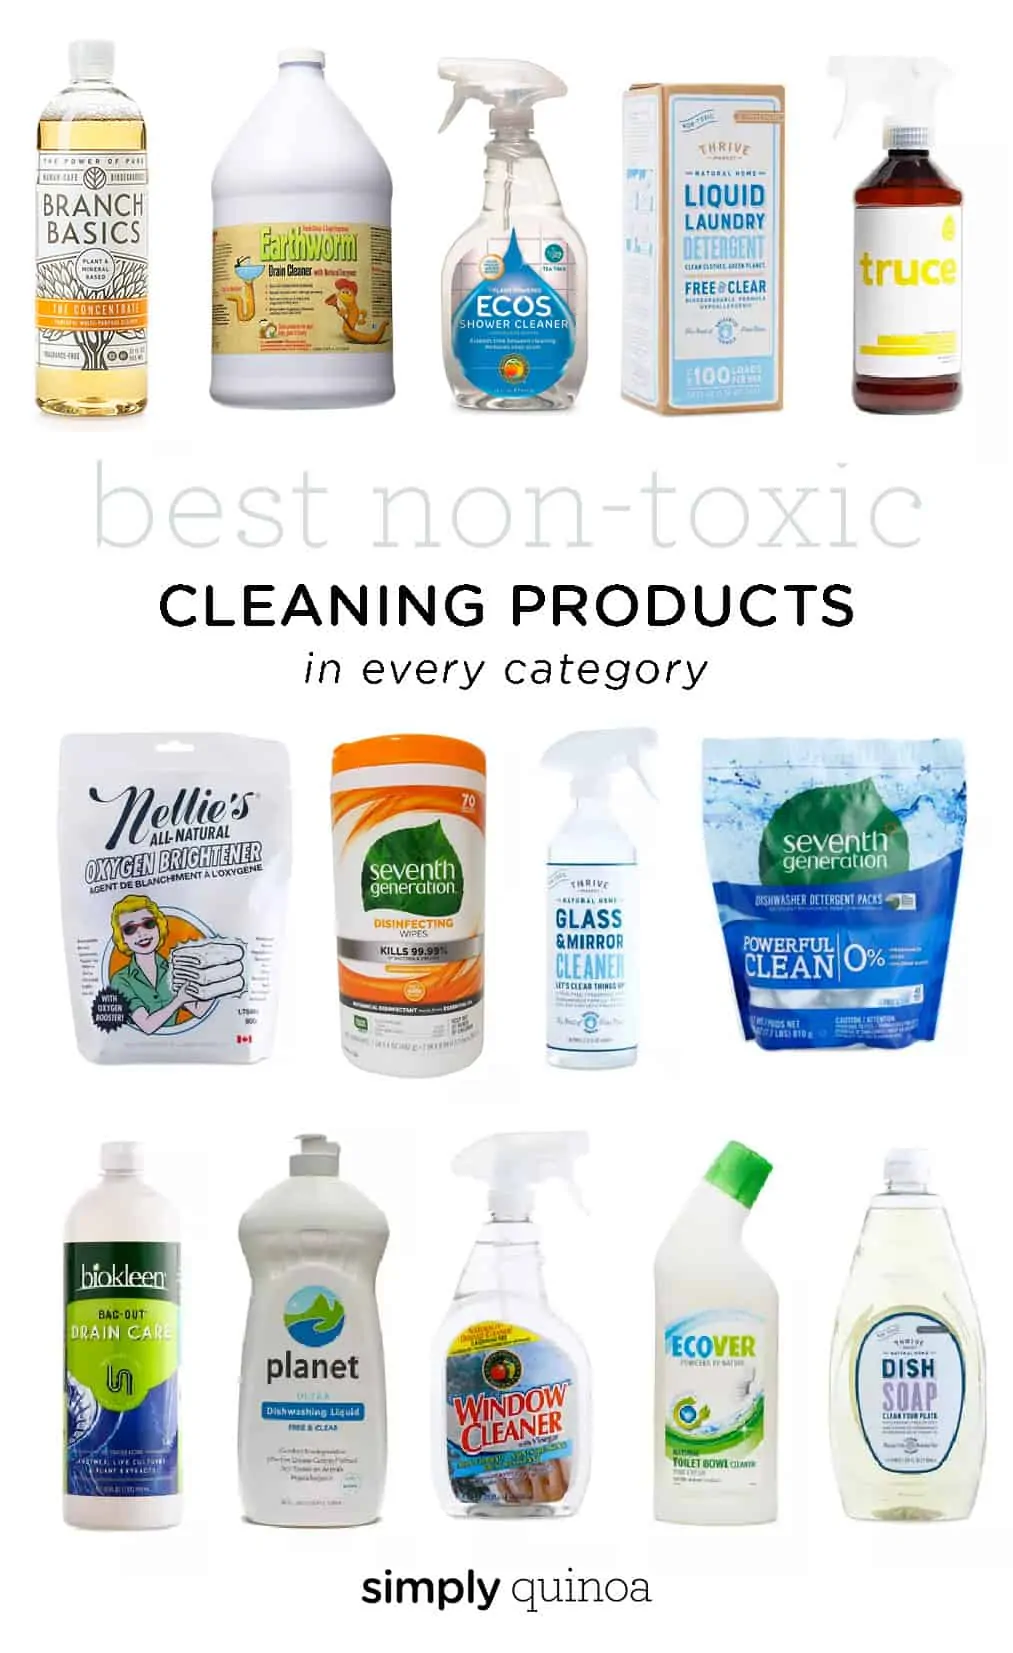 Top 5 Best Non-Toxic Cleaners For A Healthier Home – Fomin Soap